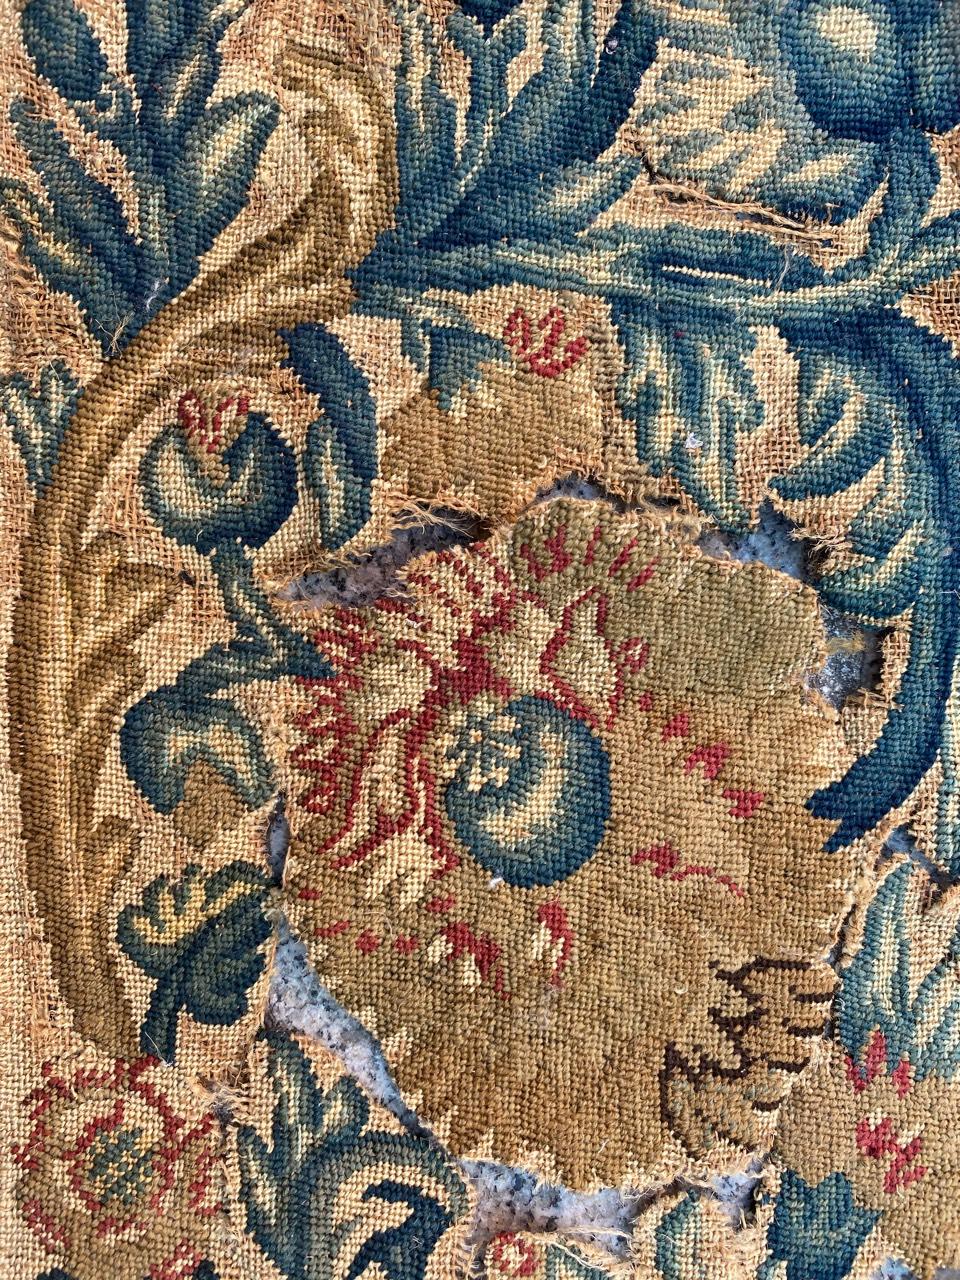 Very beautiful fragment of needlepoint tapestry from 18th century, with nice floral design and beautiful natural colors, entirely and finely hand embroidered with needlepoint method with wool and silk.